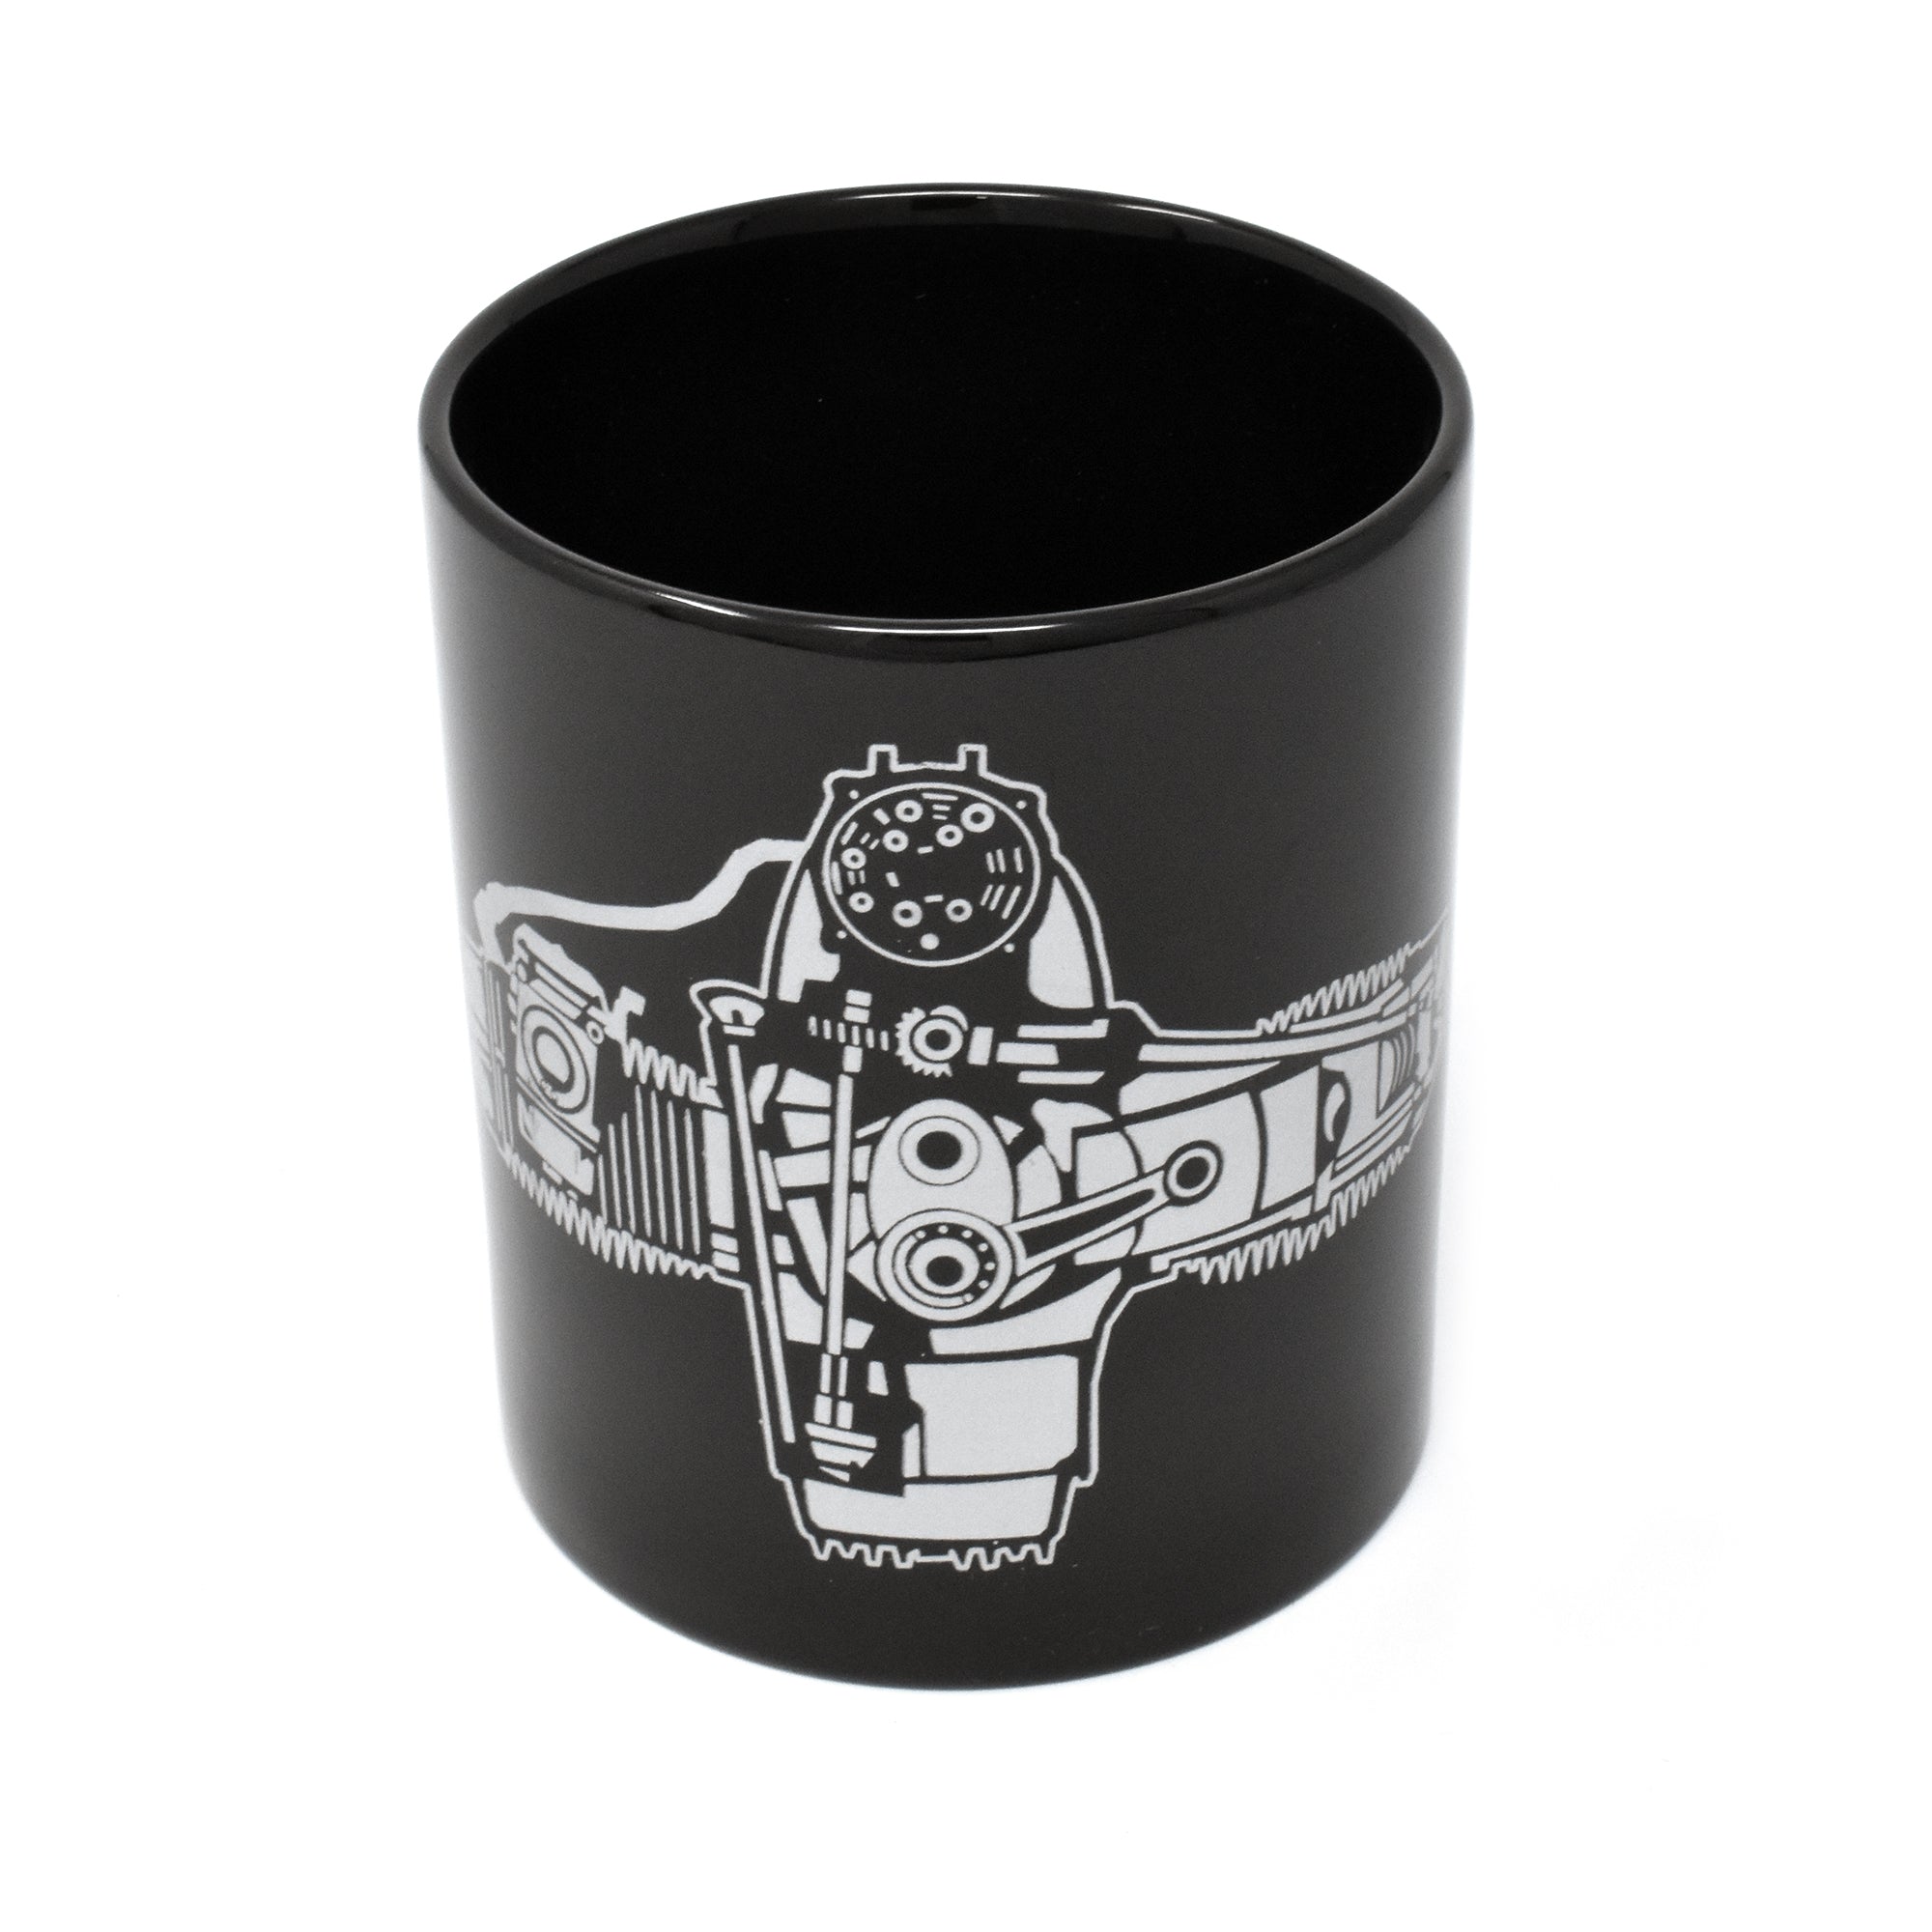 Ural Boxer Coffee Cup